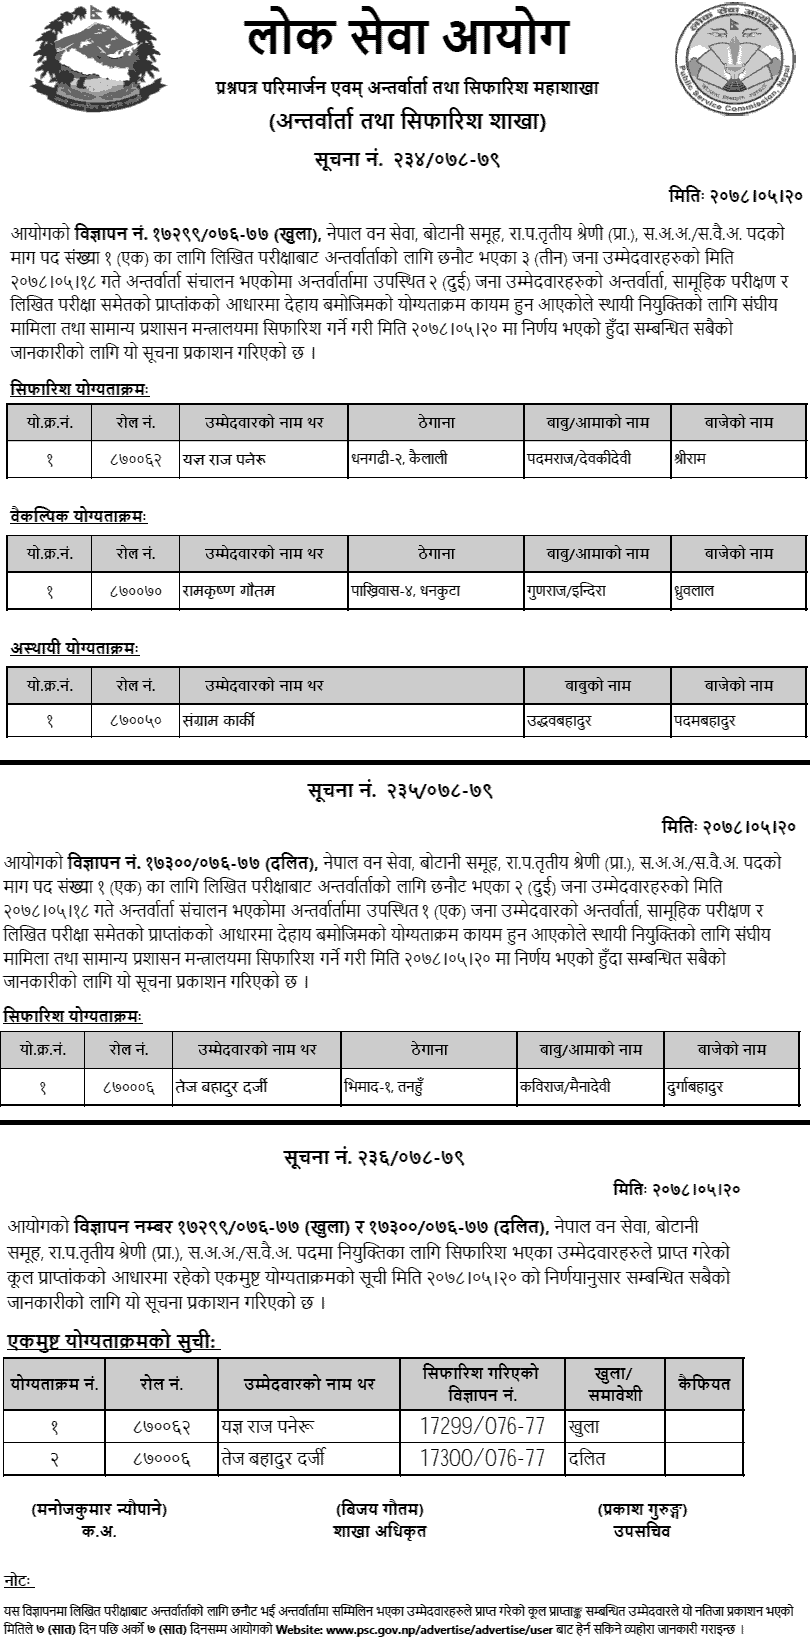 Lok Sewa Aayog Final Result and Recommendation of Forest Officer (Botany)